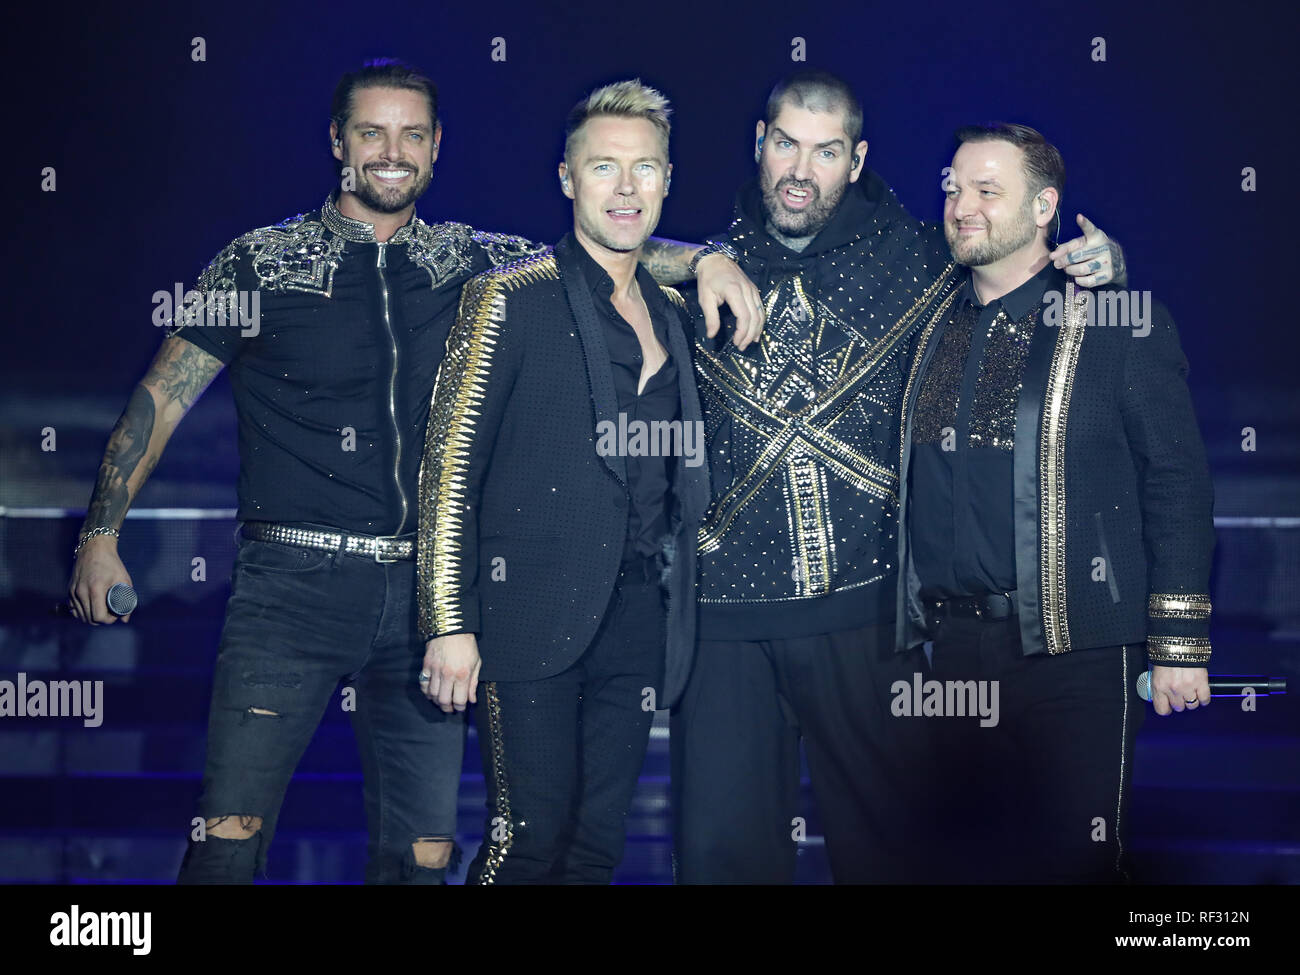 EDITORIAL USE ONLY (left to right) Keith Duffy, Ronan Keating, Shane Lynch  and Mikey Graham of Boyzone on stage at the SSE Arena, Belfast, as part of  the band's Thank You &